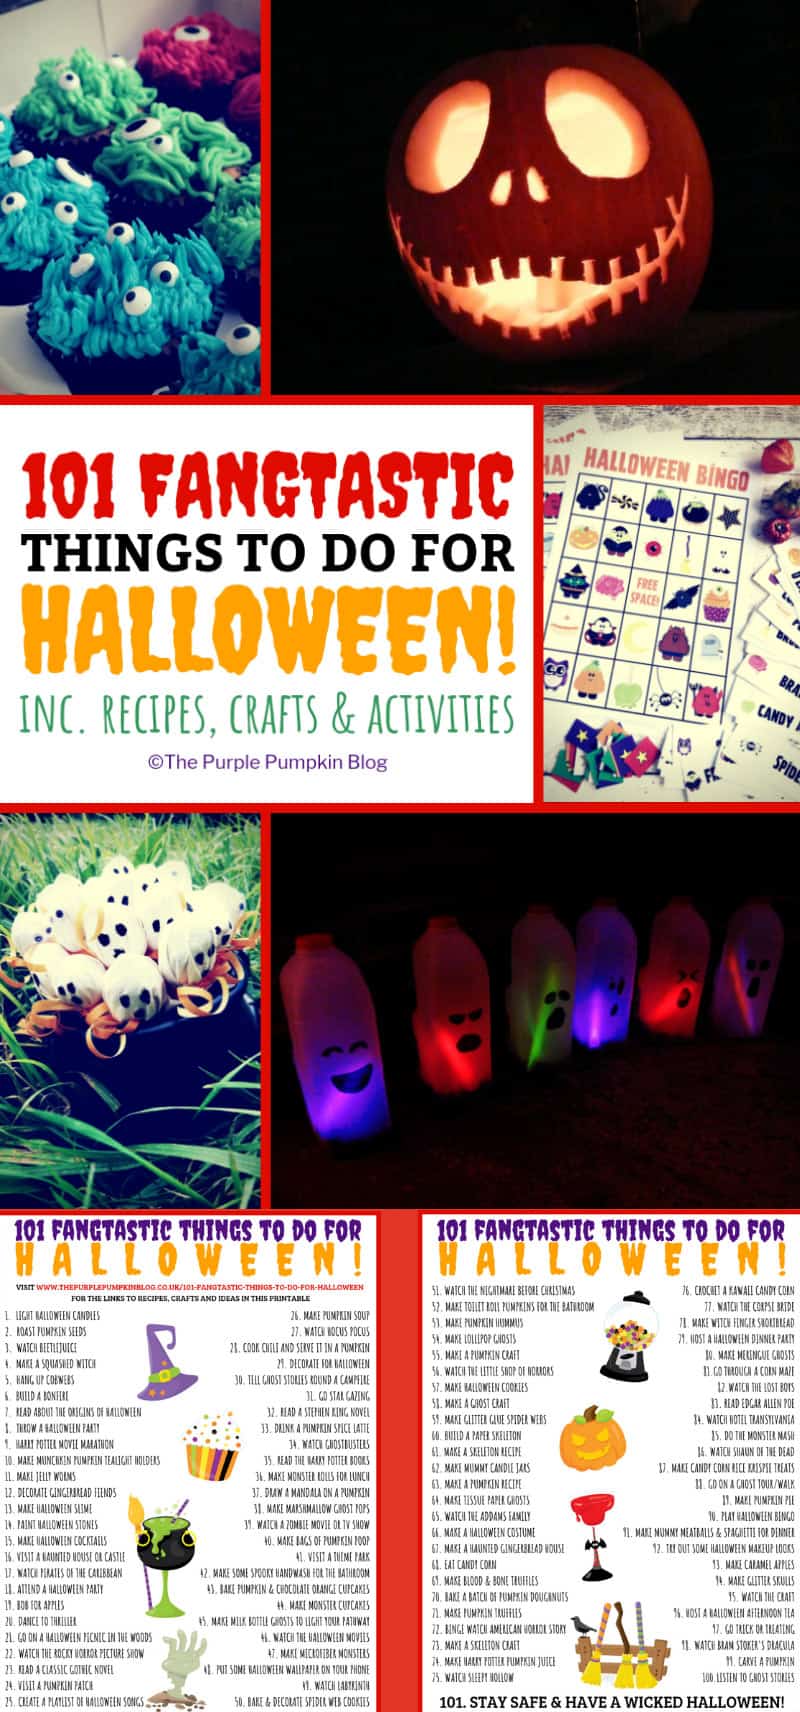 101 Fangtastic Things To Do For Halloween! This mega list of things contains so many ideas for Halloween, including recipes, crafts, activities, days out, and tons more! You won't be short on things to do for Halloween if you have this printable to hand!